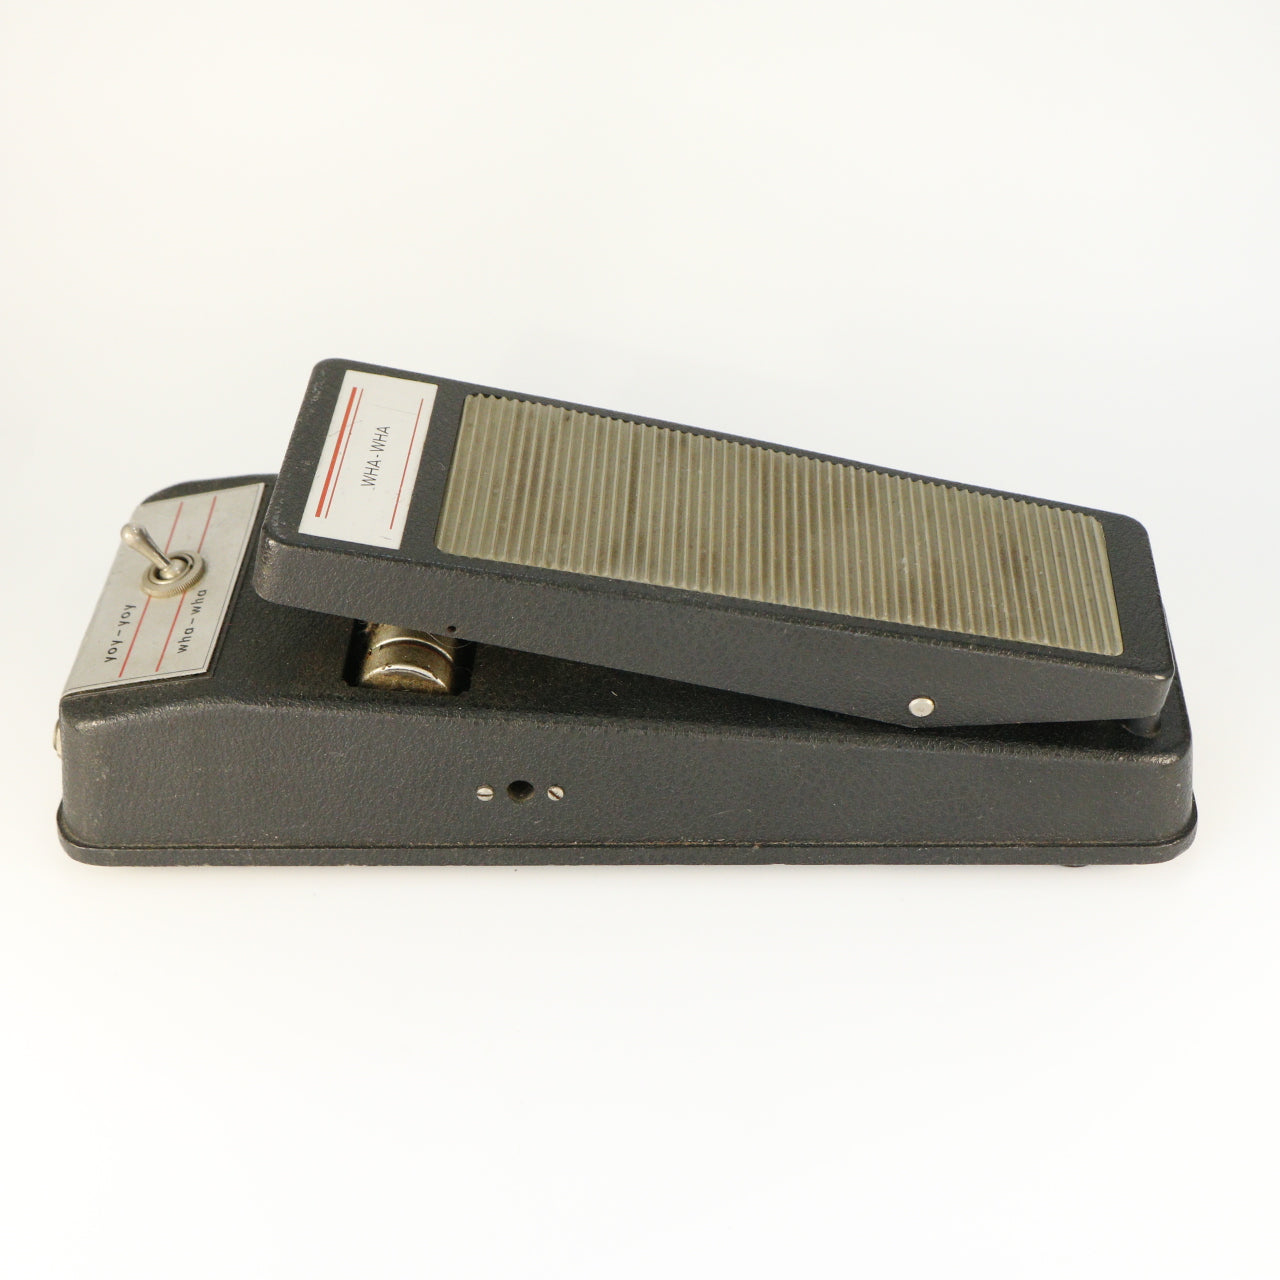 Schaller Yoy-Yoy Wha-Wha Wah Pedal (Vintage, Made in Germany)